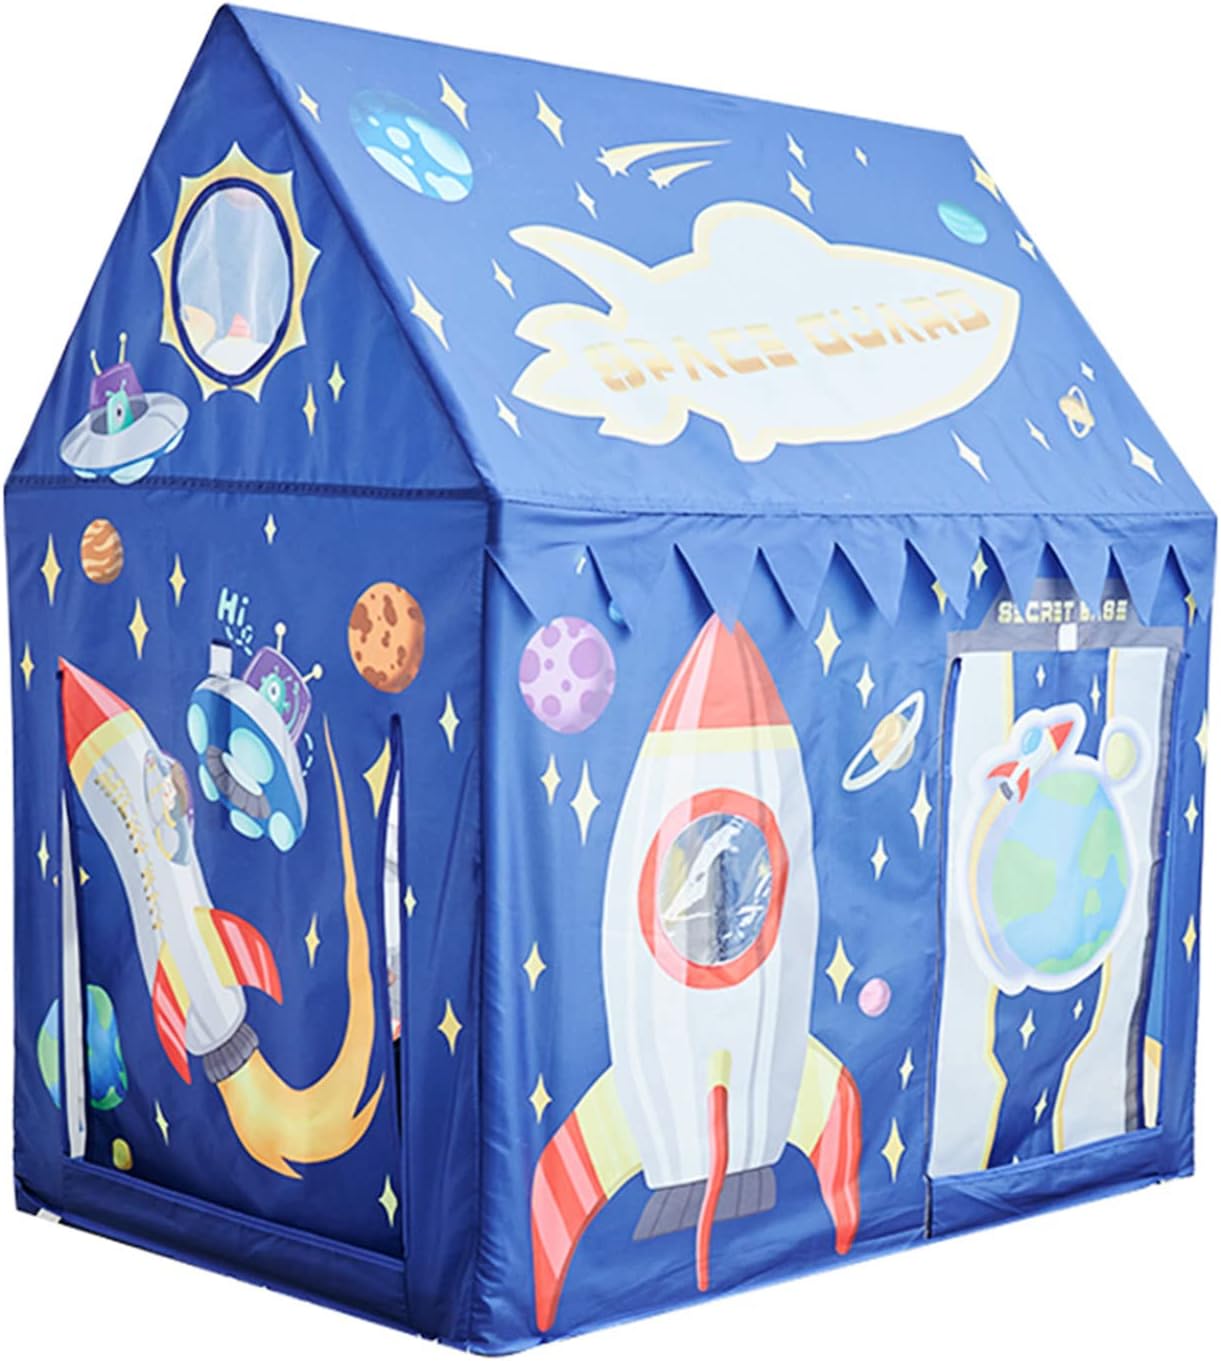 Kids Wendy House Play Tent Astronaut